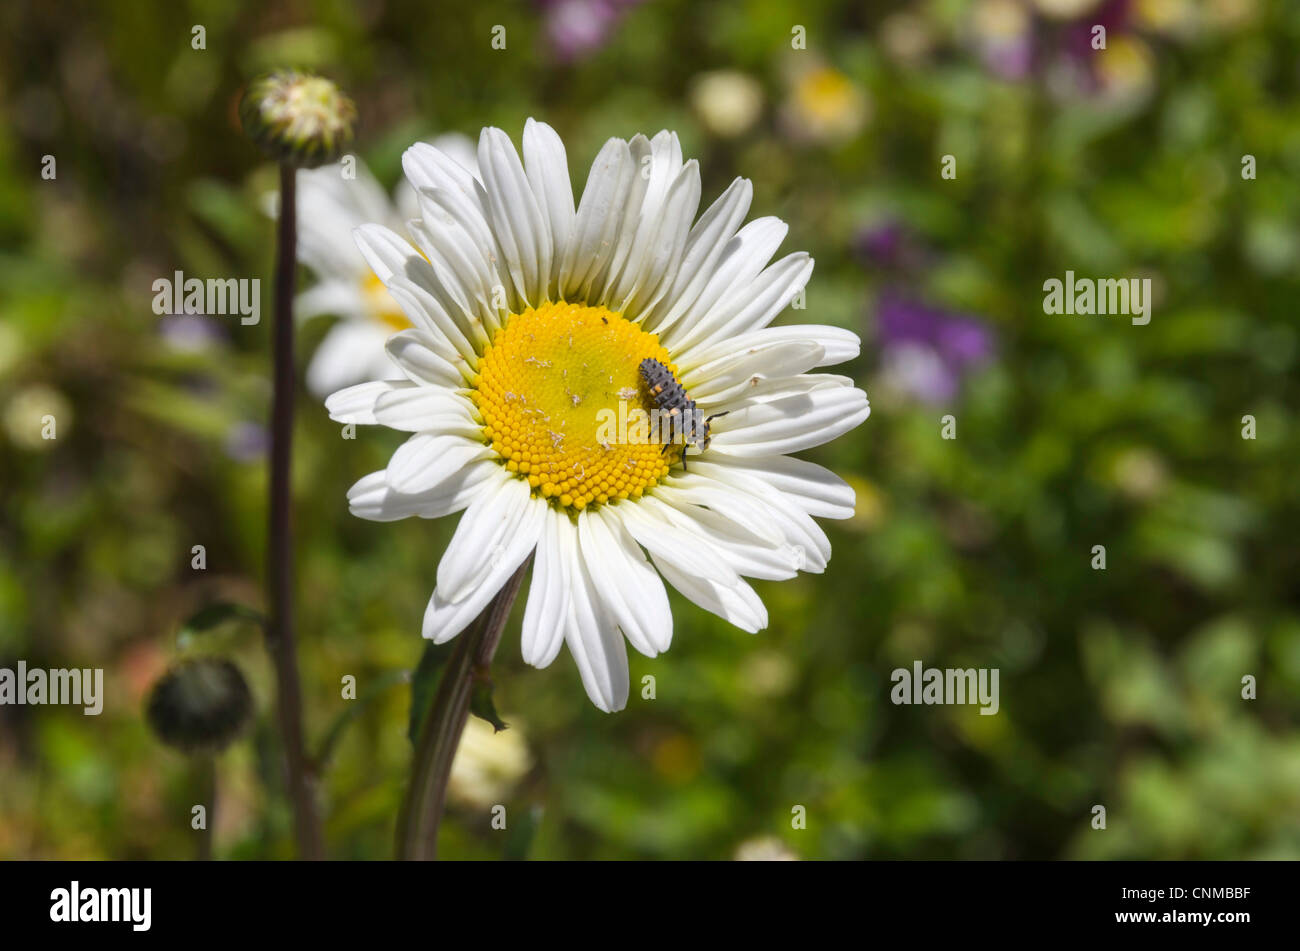 Beetle (Coccinellidae) on a white sun flower. Banque D'Images